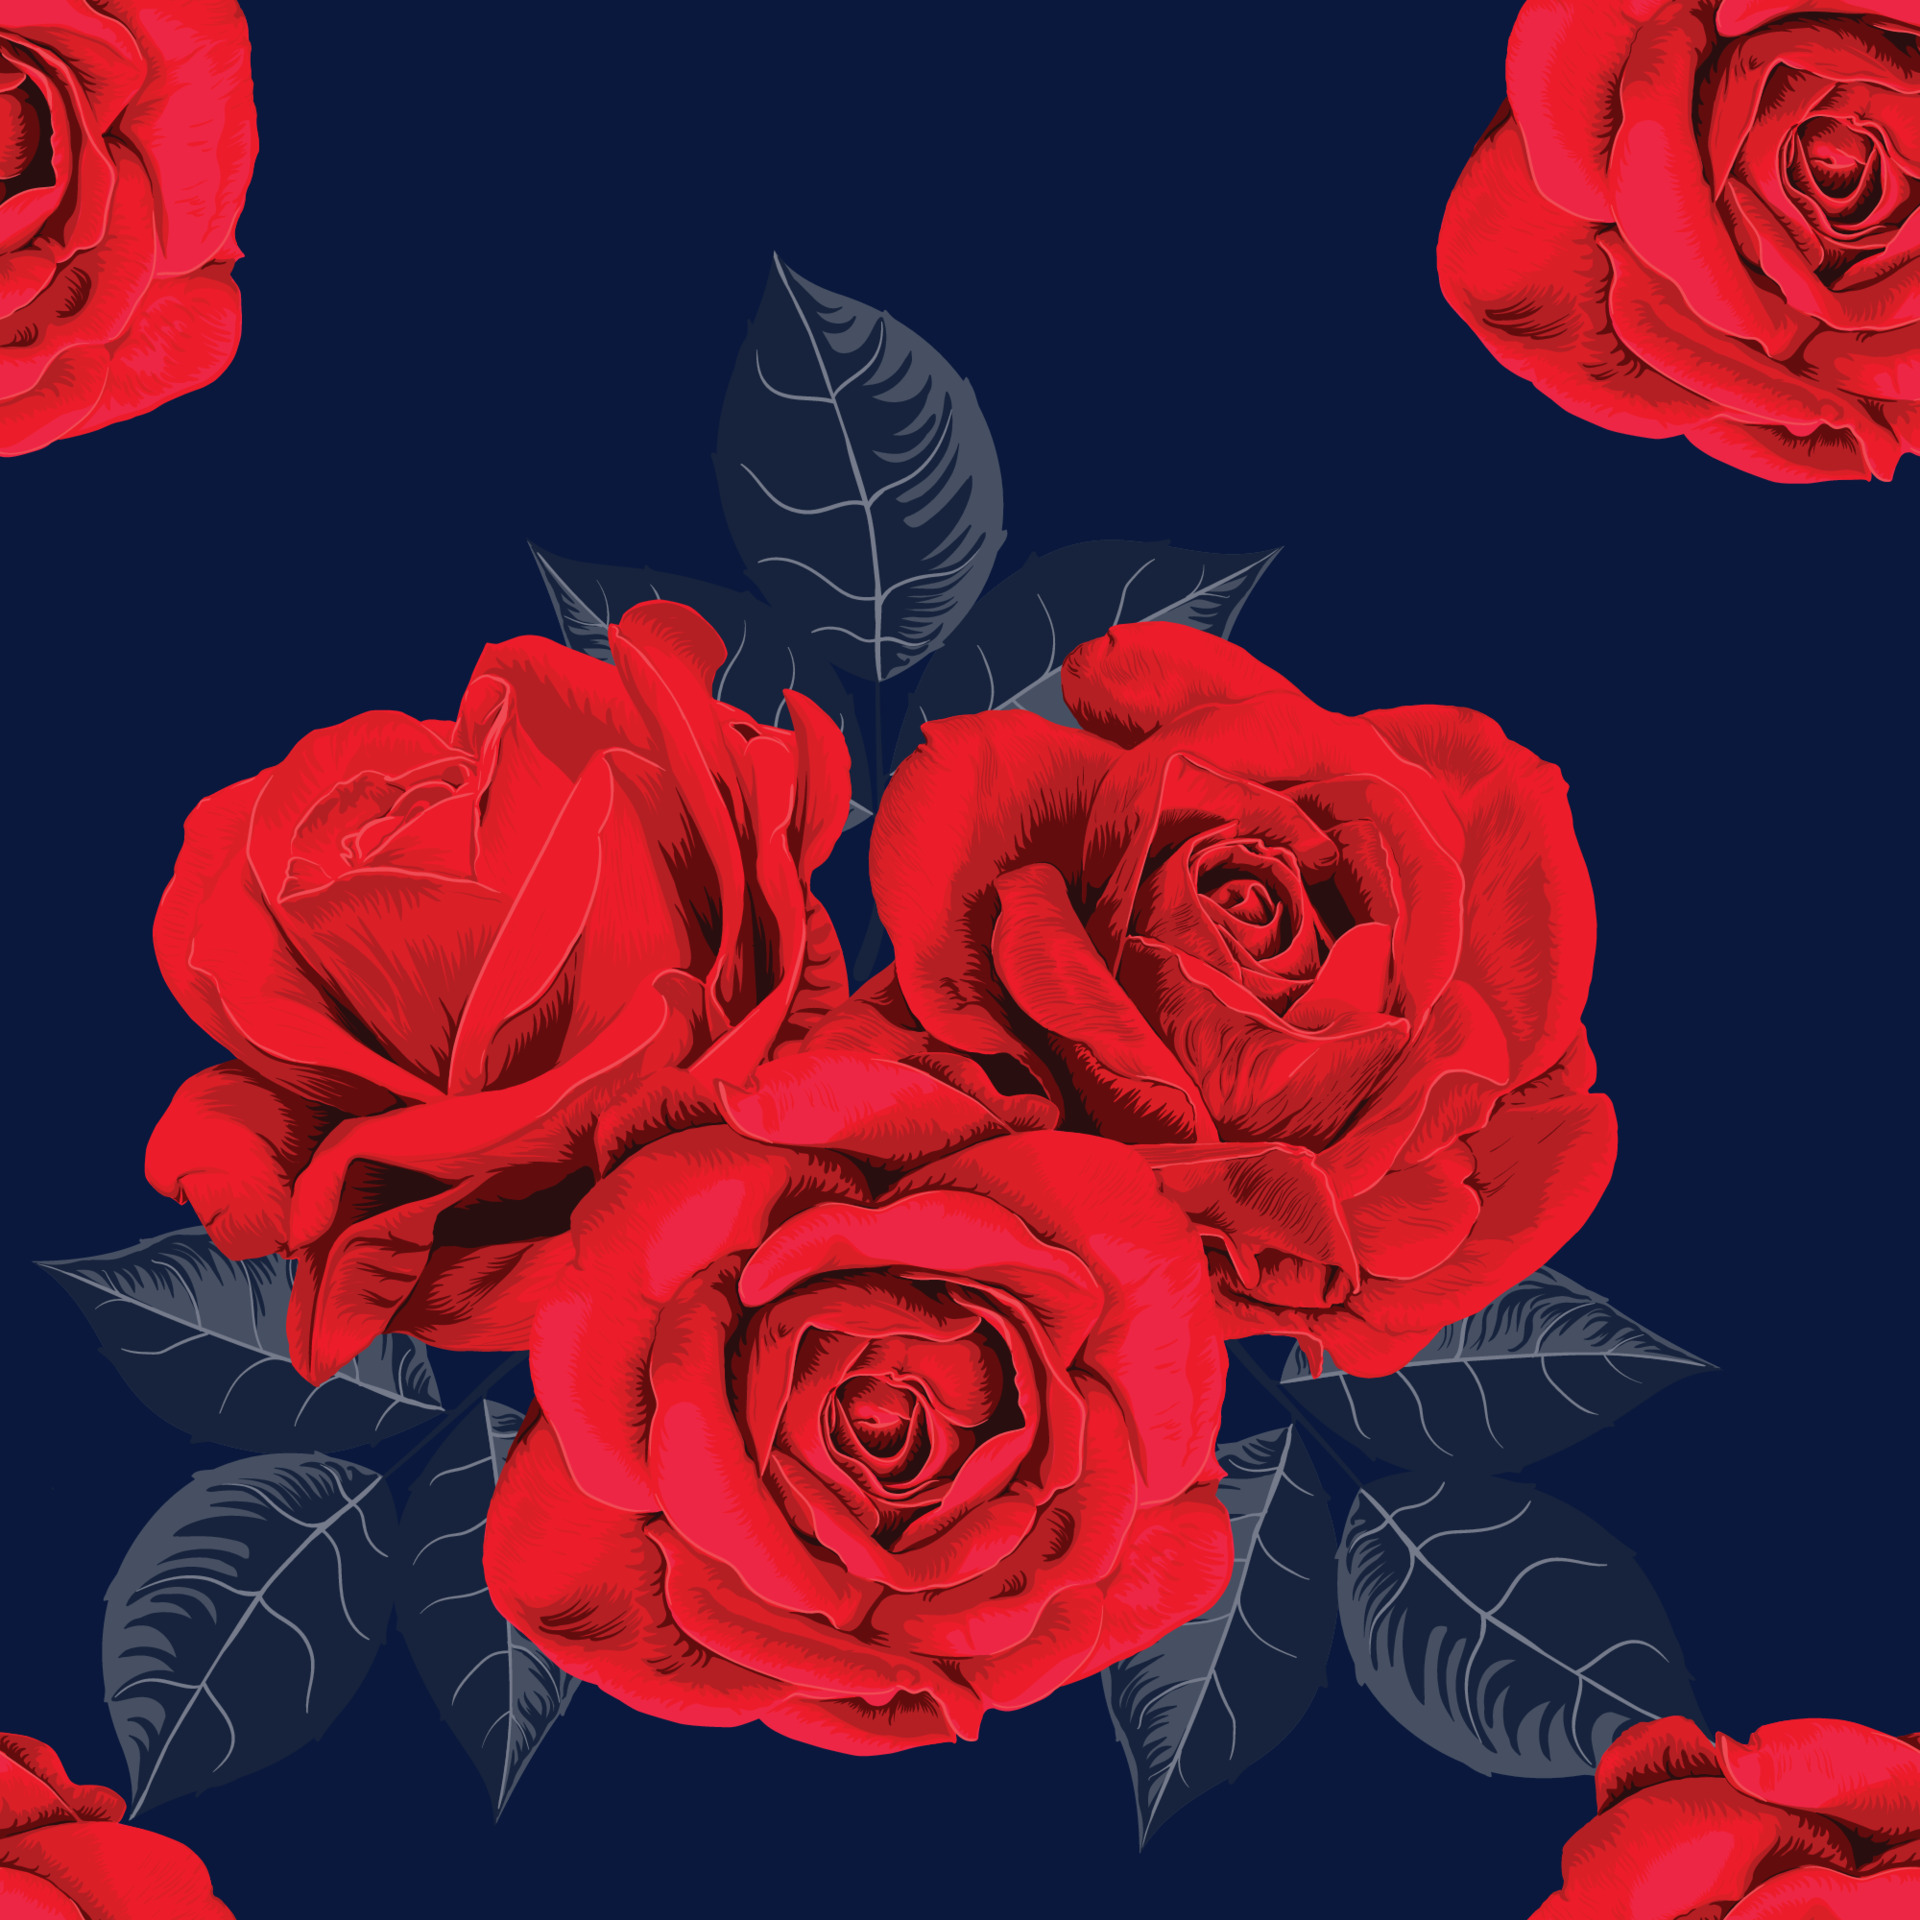 Seamless pattern red rose flowers vintage abstract dark blue background.Vector illustration drawing watercolor style.For used wallpaper design, textile fabric or wrapping paper